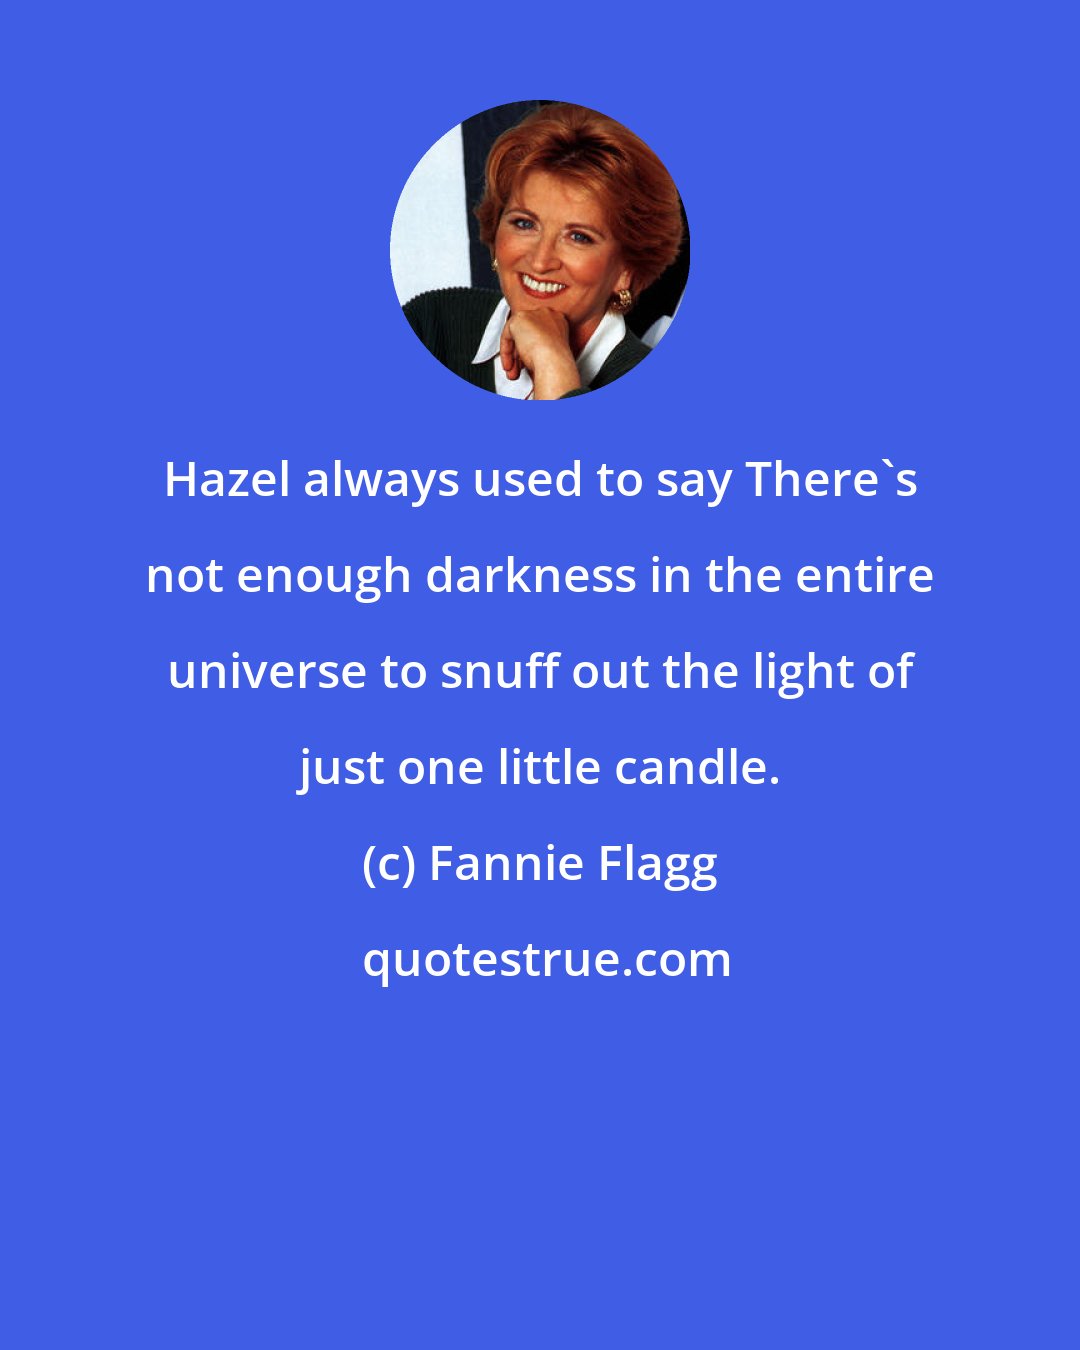 Fannie Flagg: Hazel always used to say There's not enough darkness in the entire universe to snuff out the light of just one little candle.